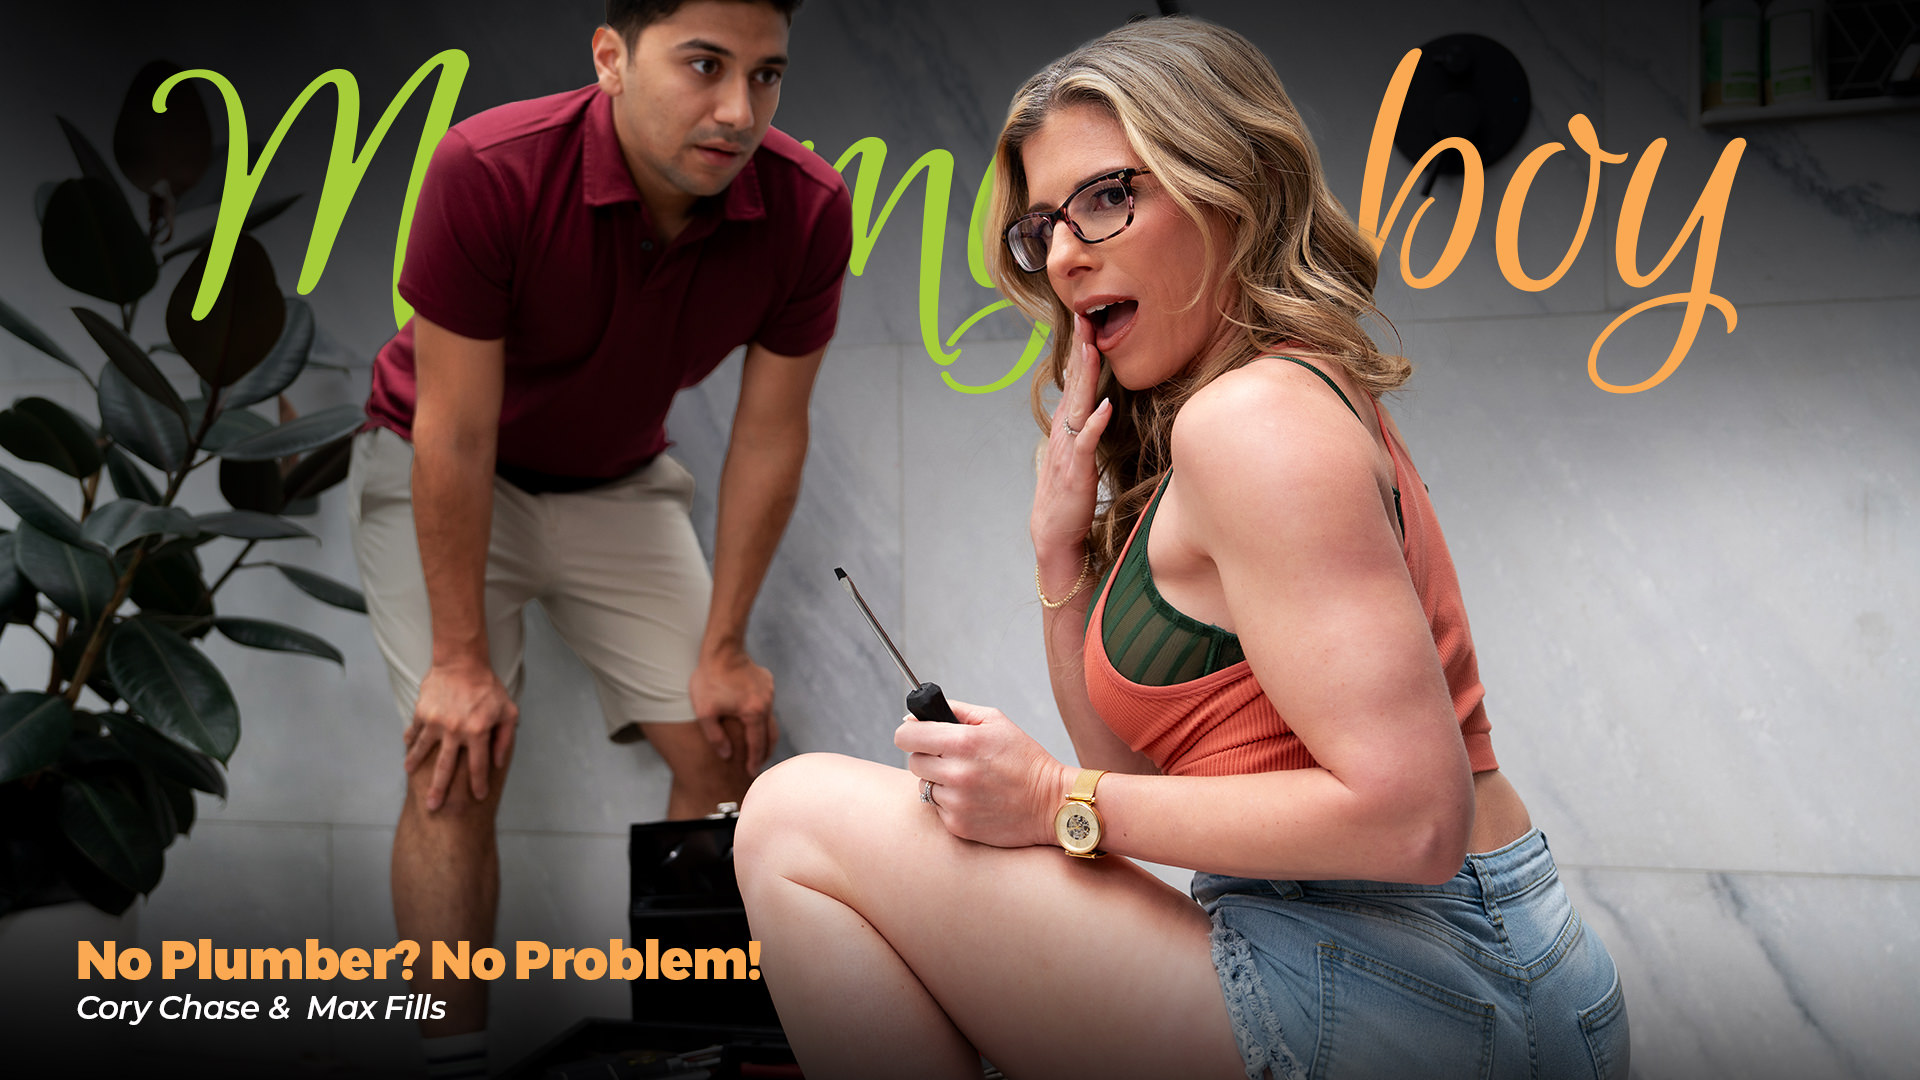 Cory Chase, Max Fills “No Plumber? No Problem!” MommysBoy